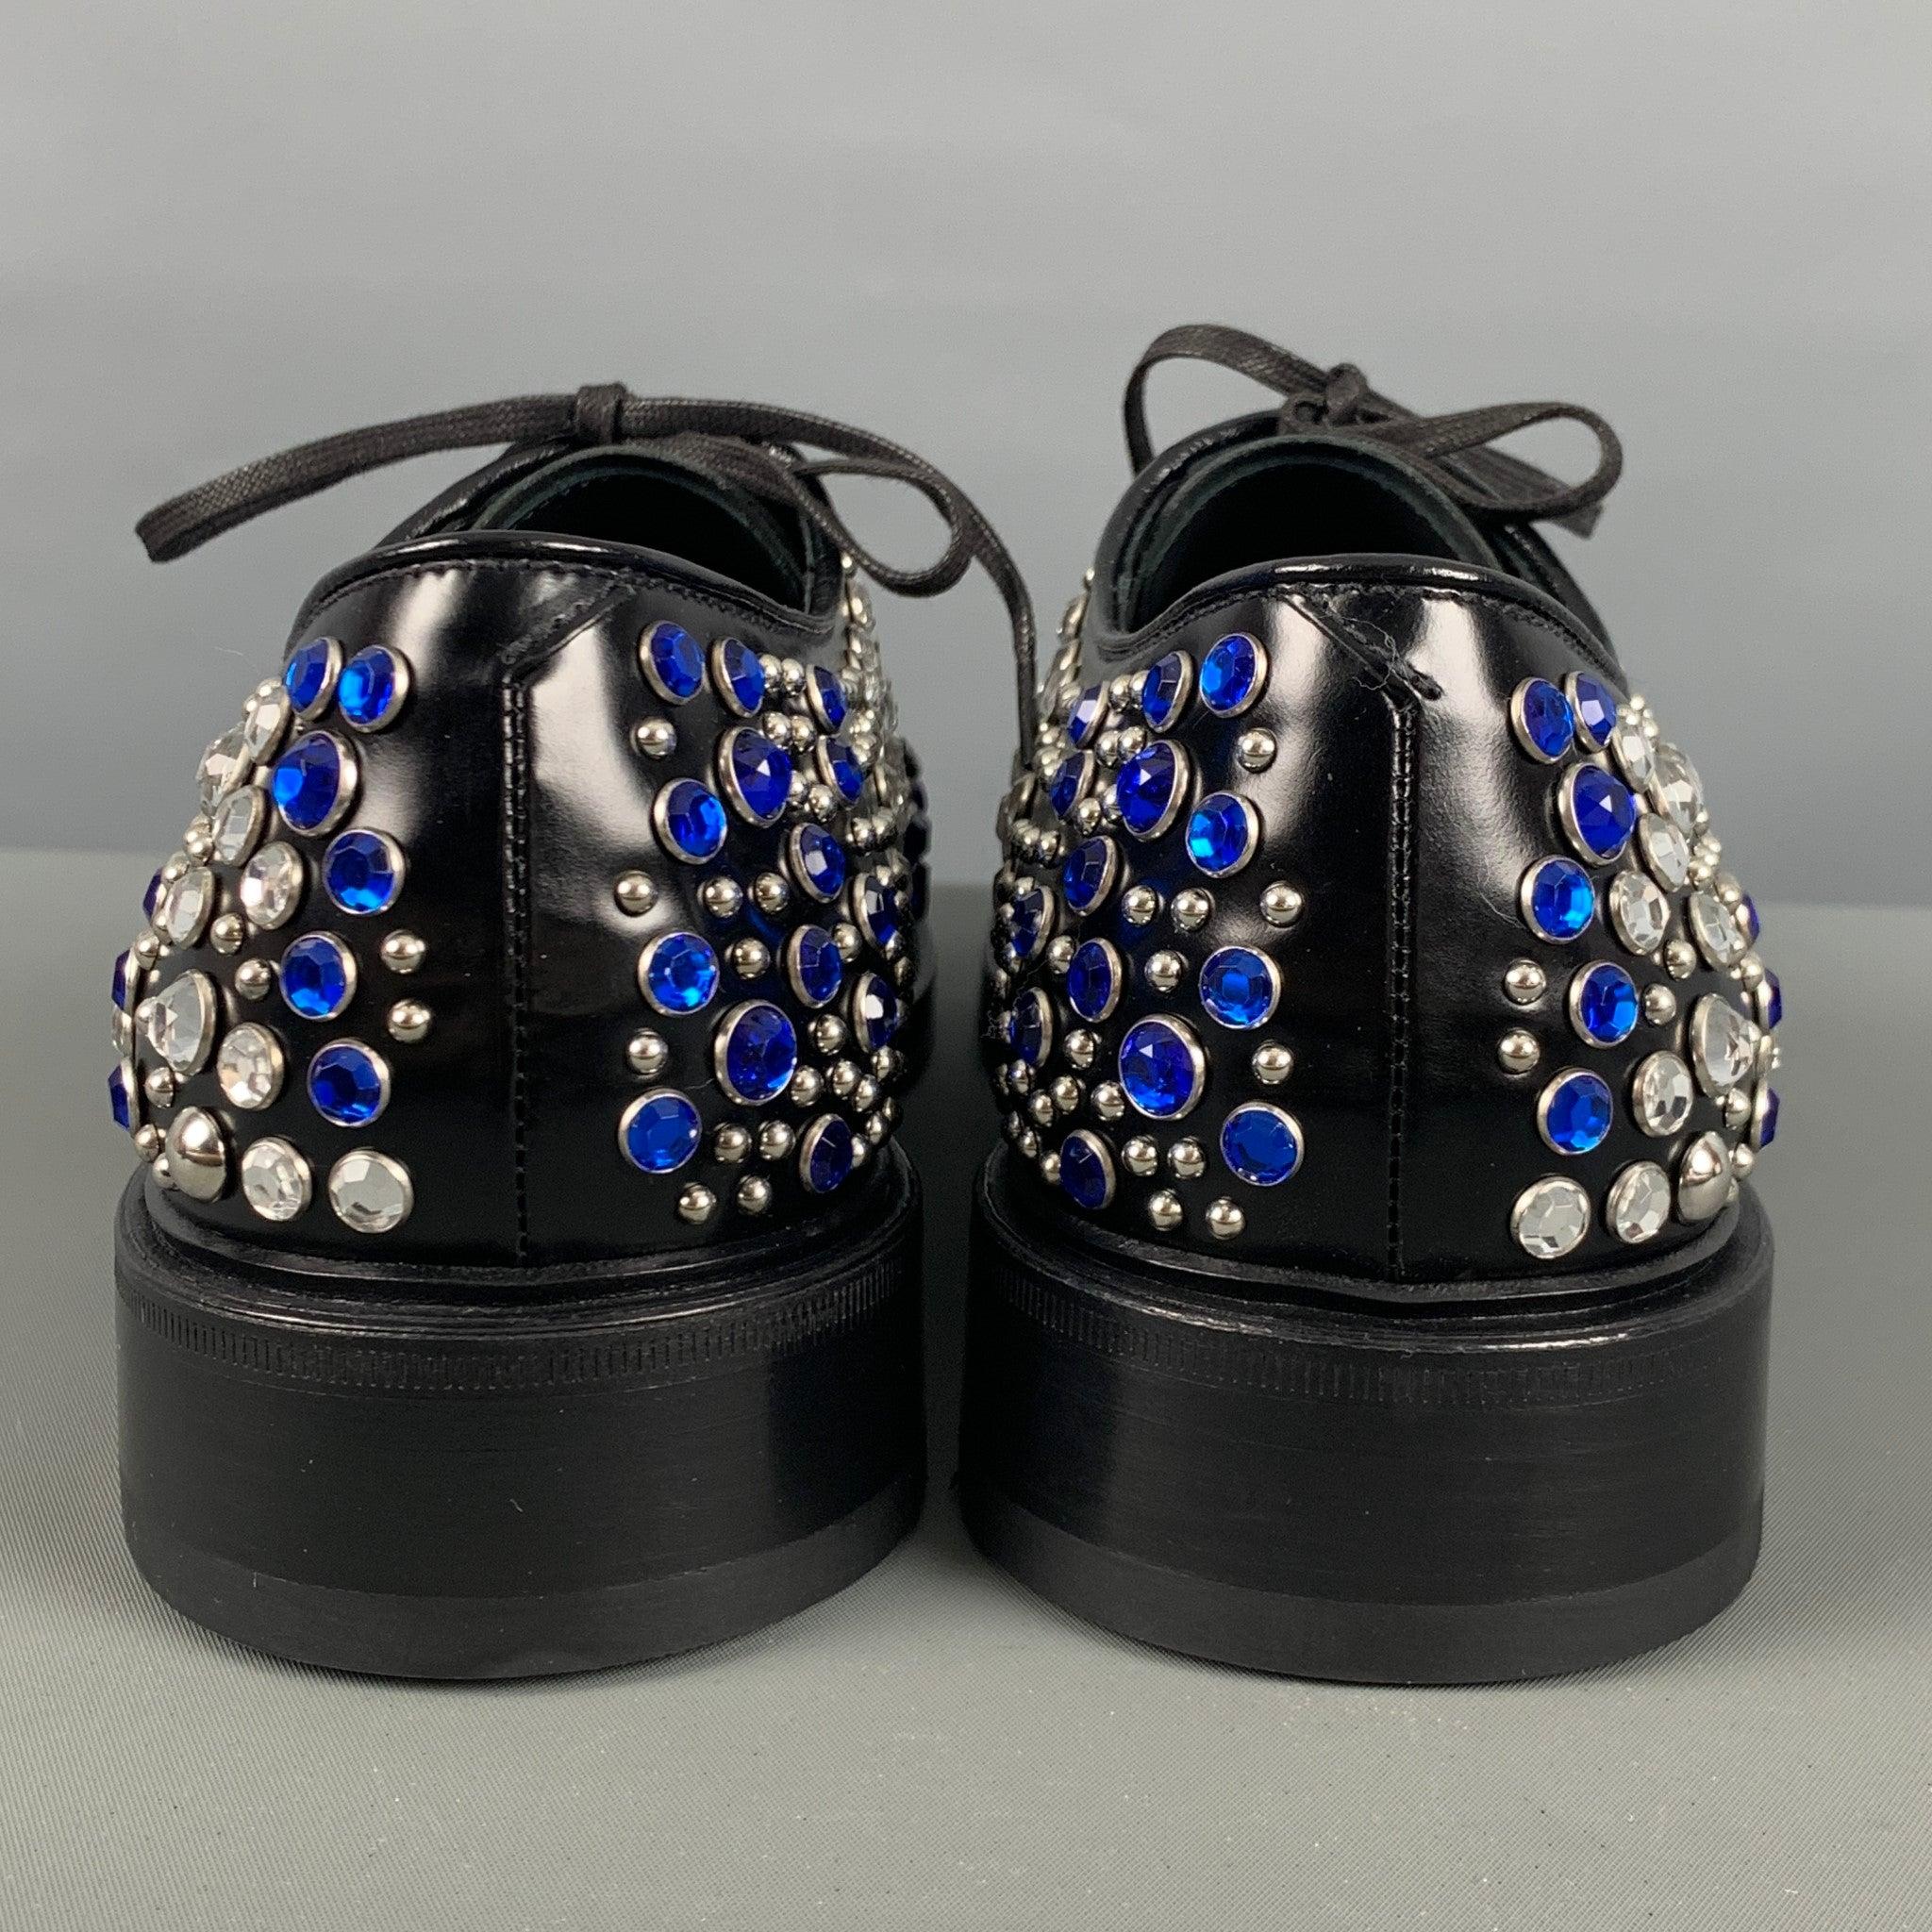 PRADA Size 9 Black Silver & Blue Studded Leather Lace Up Shoes In Excellent Condition For Sale In San Francisco, CA